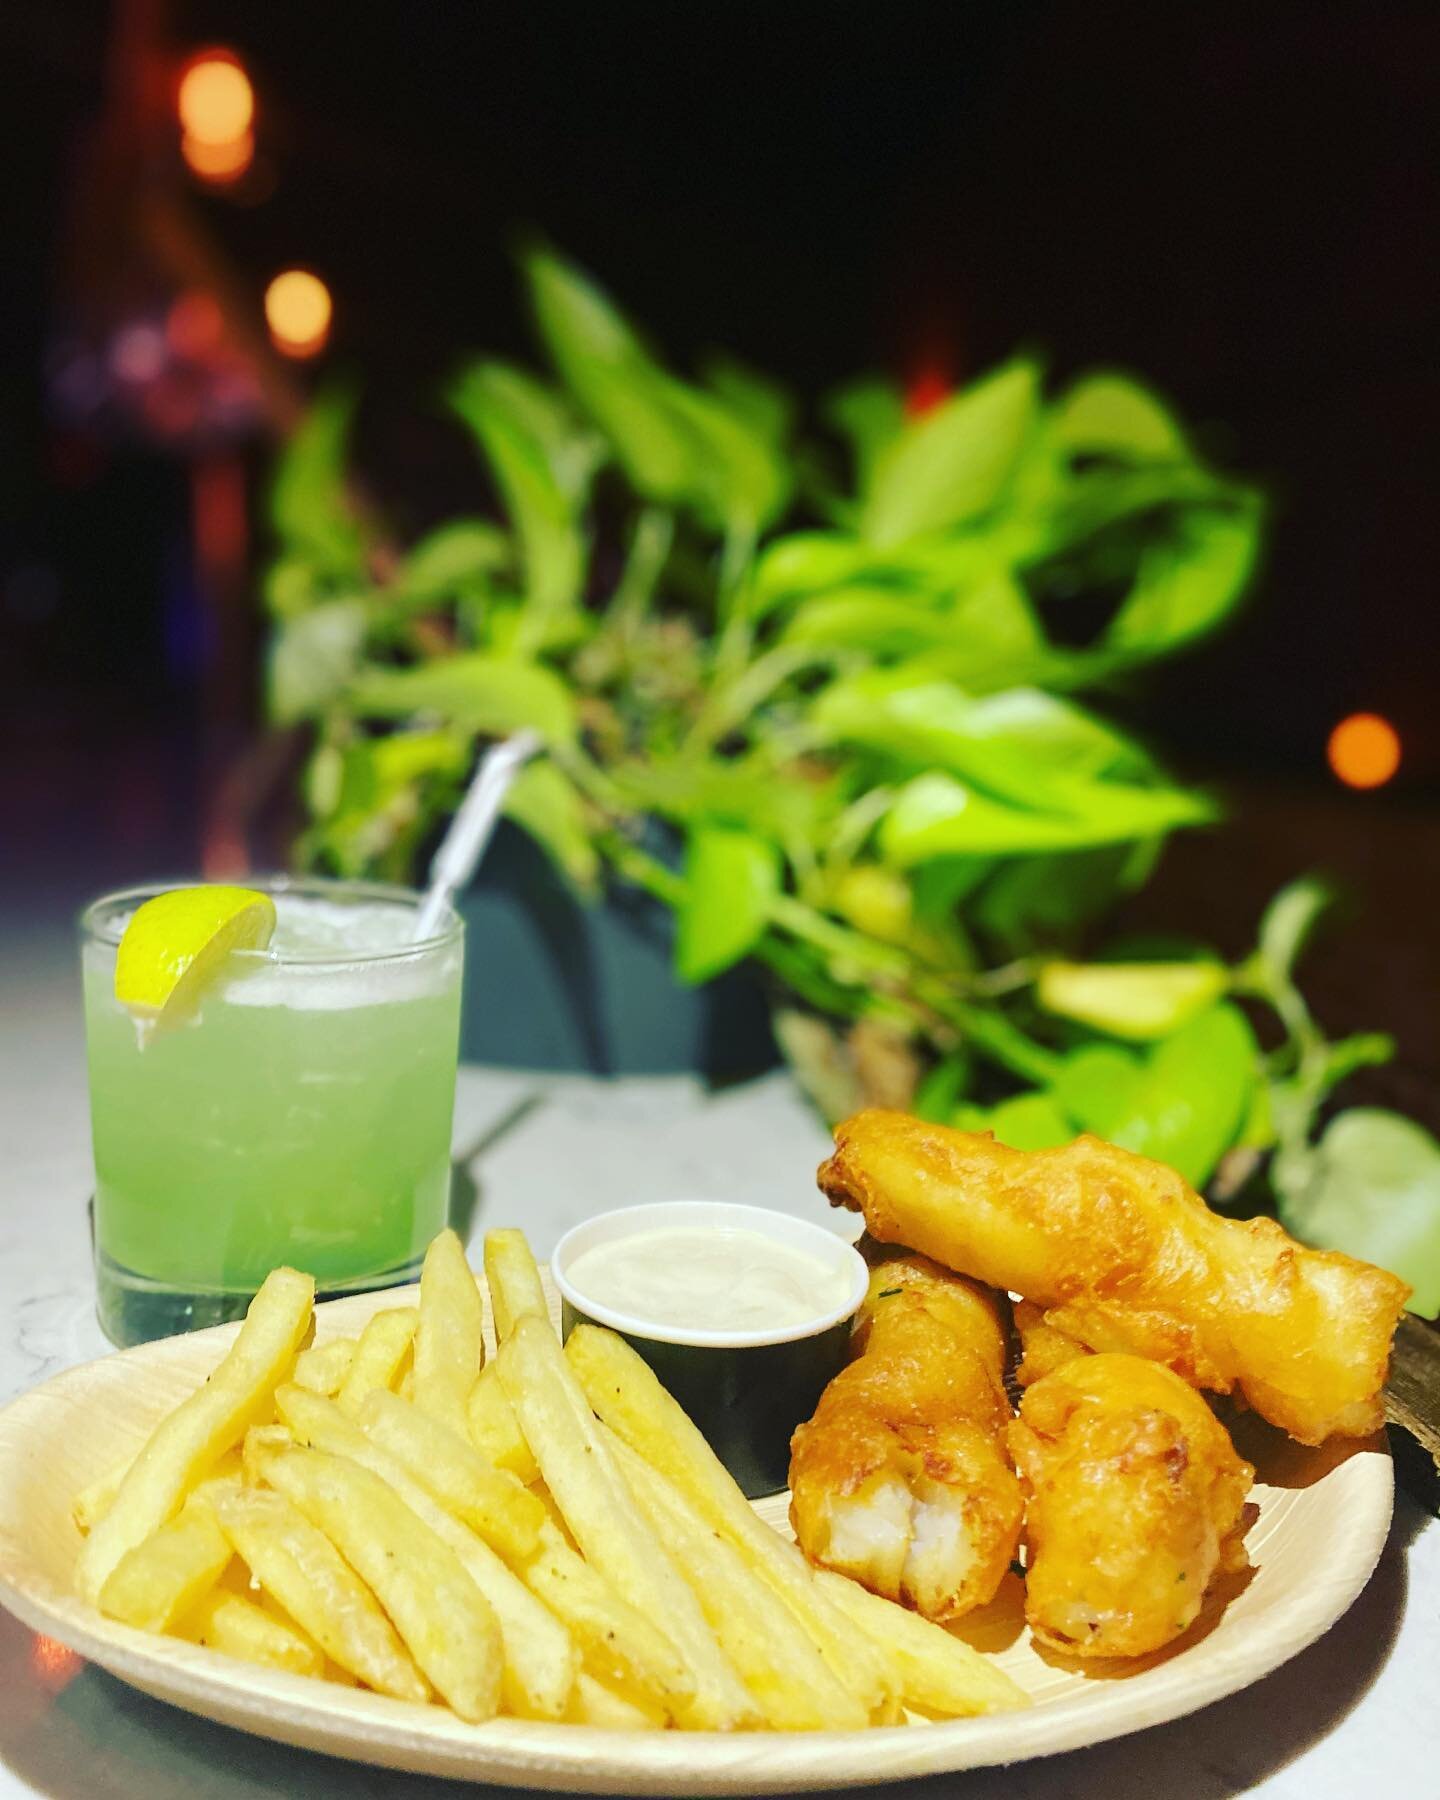 We&rsquo;re ready for St Patrick&rsquo;s Day
Wednesday, March 17th!
Lucky 🍀 Shooters $8
Green 🍻 $5
Fish &amp; Chips $12
Indoor &amp; Heated Outdoor dining, see you then!